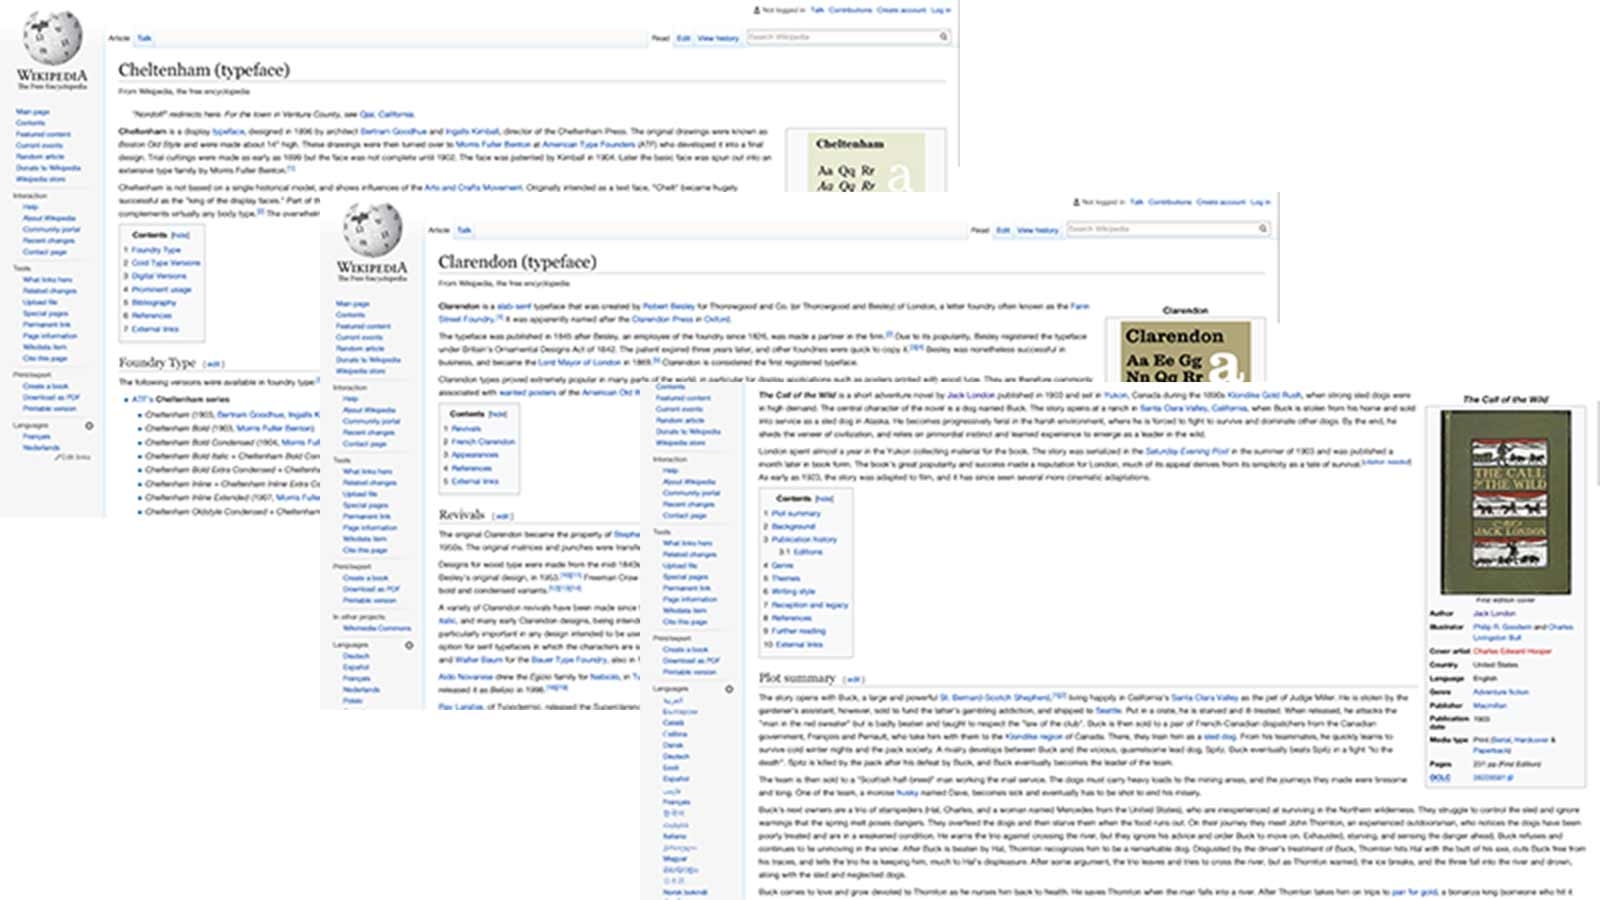 Wikipedia articles from the research phase of the project